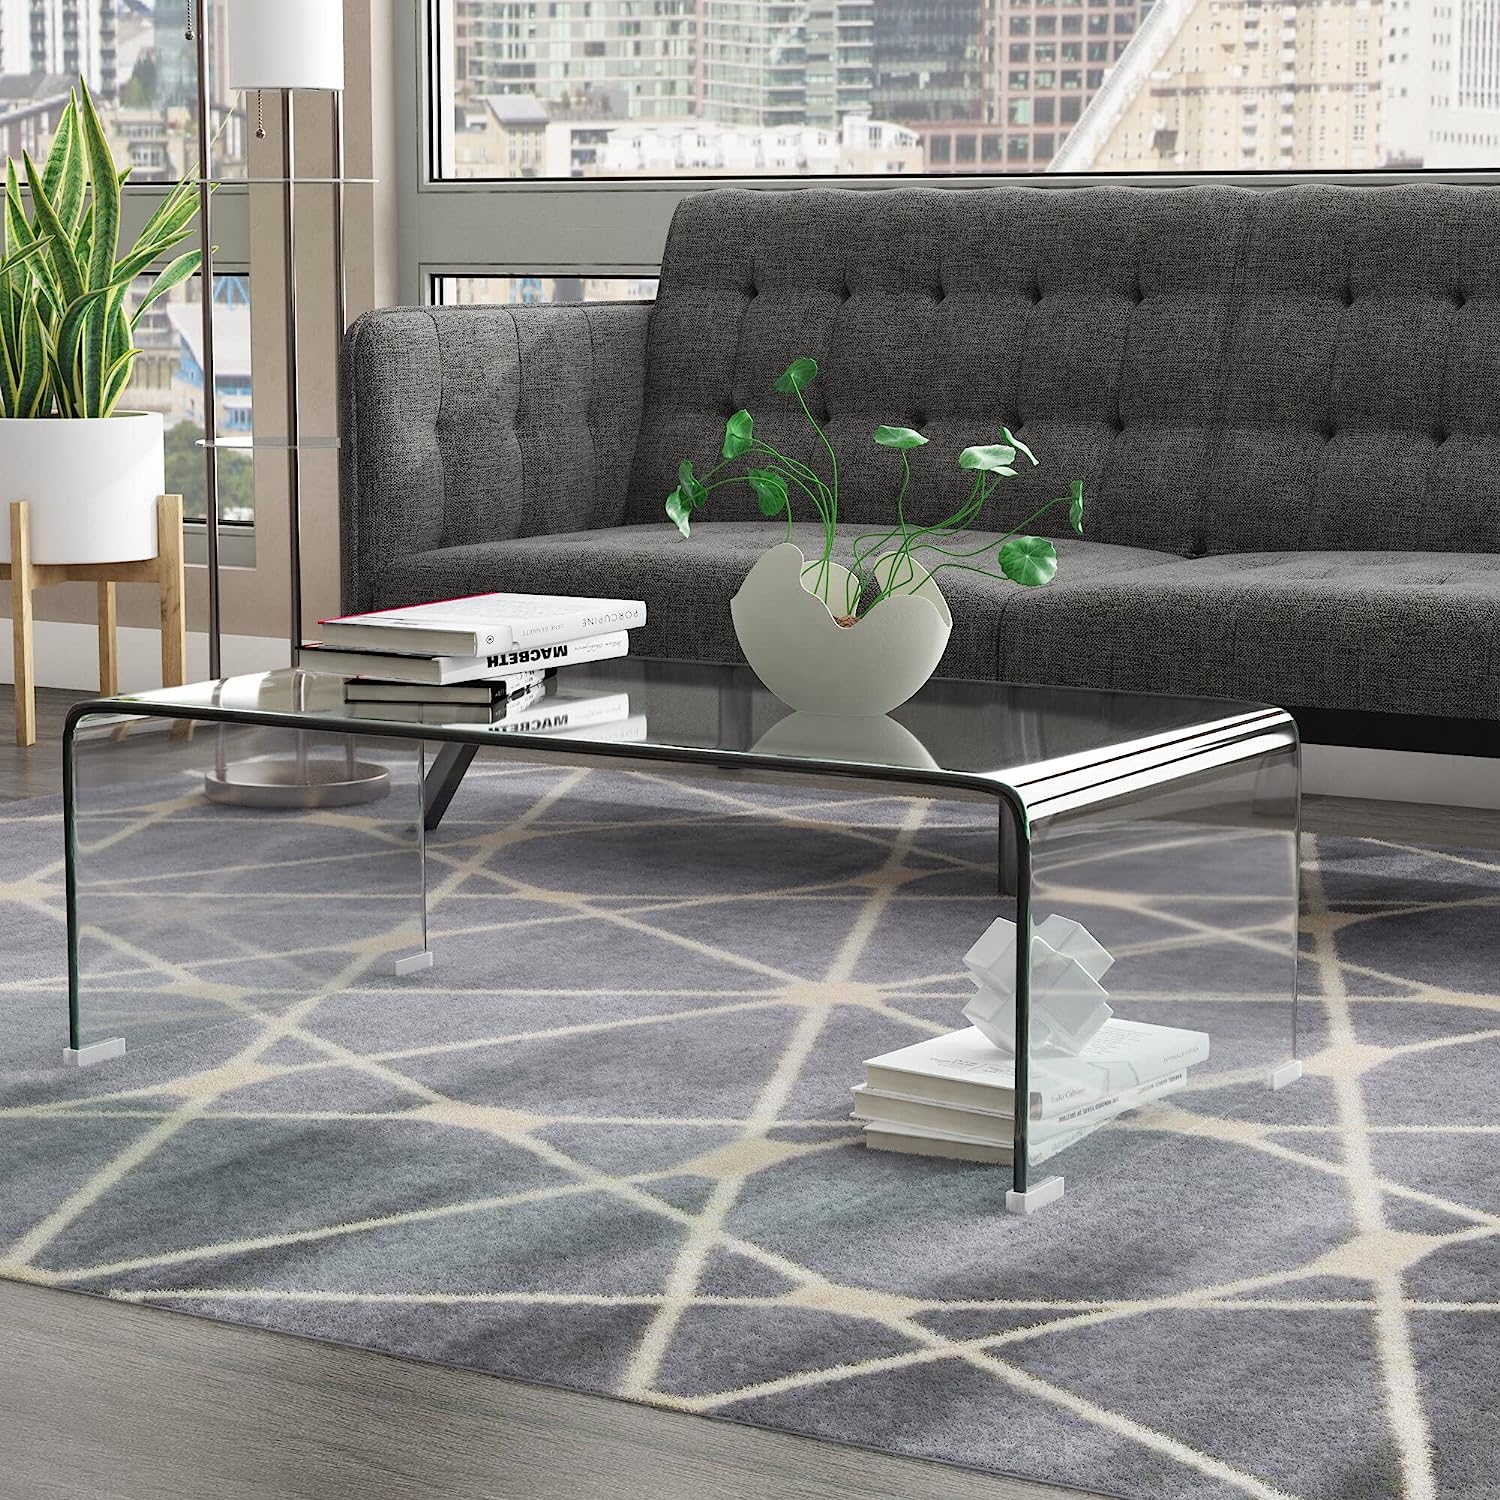 waterfall glass tables for living room genuine real glass solid tempered glass cocktail table for sale online with floor protectors minimalist contemporary glam furniture idea